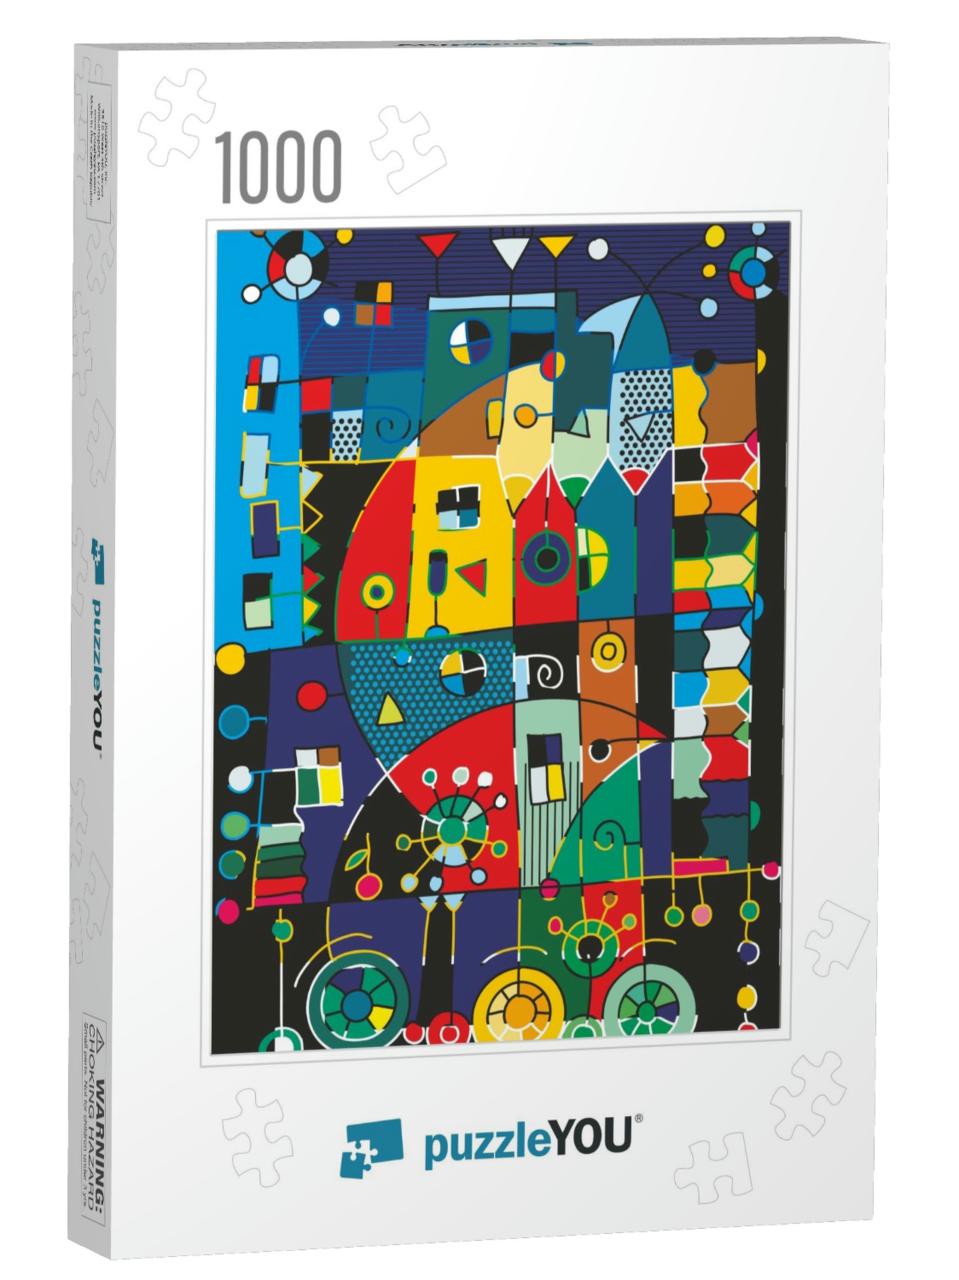 Writers Vehicle. Colorful Graphic Prints for Paintings... Jigsaw Puzzle with 1000 pieces